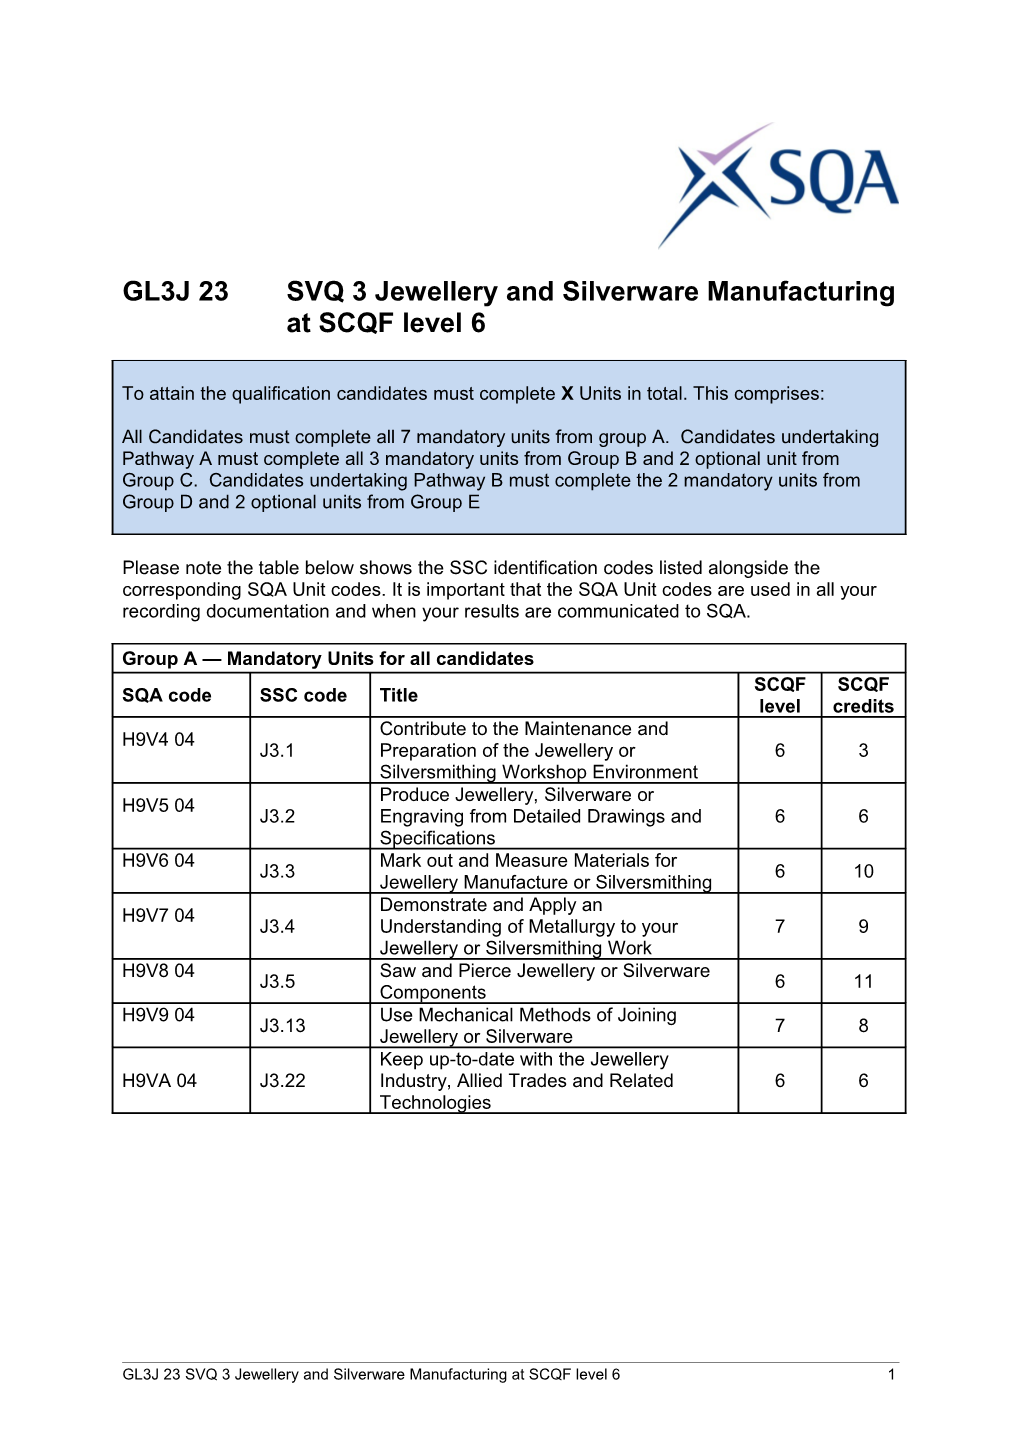 GL3J 23 SVQ 3 Jewellery and Silverware Manufacturing at SCQF Level 61